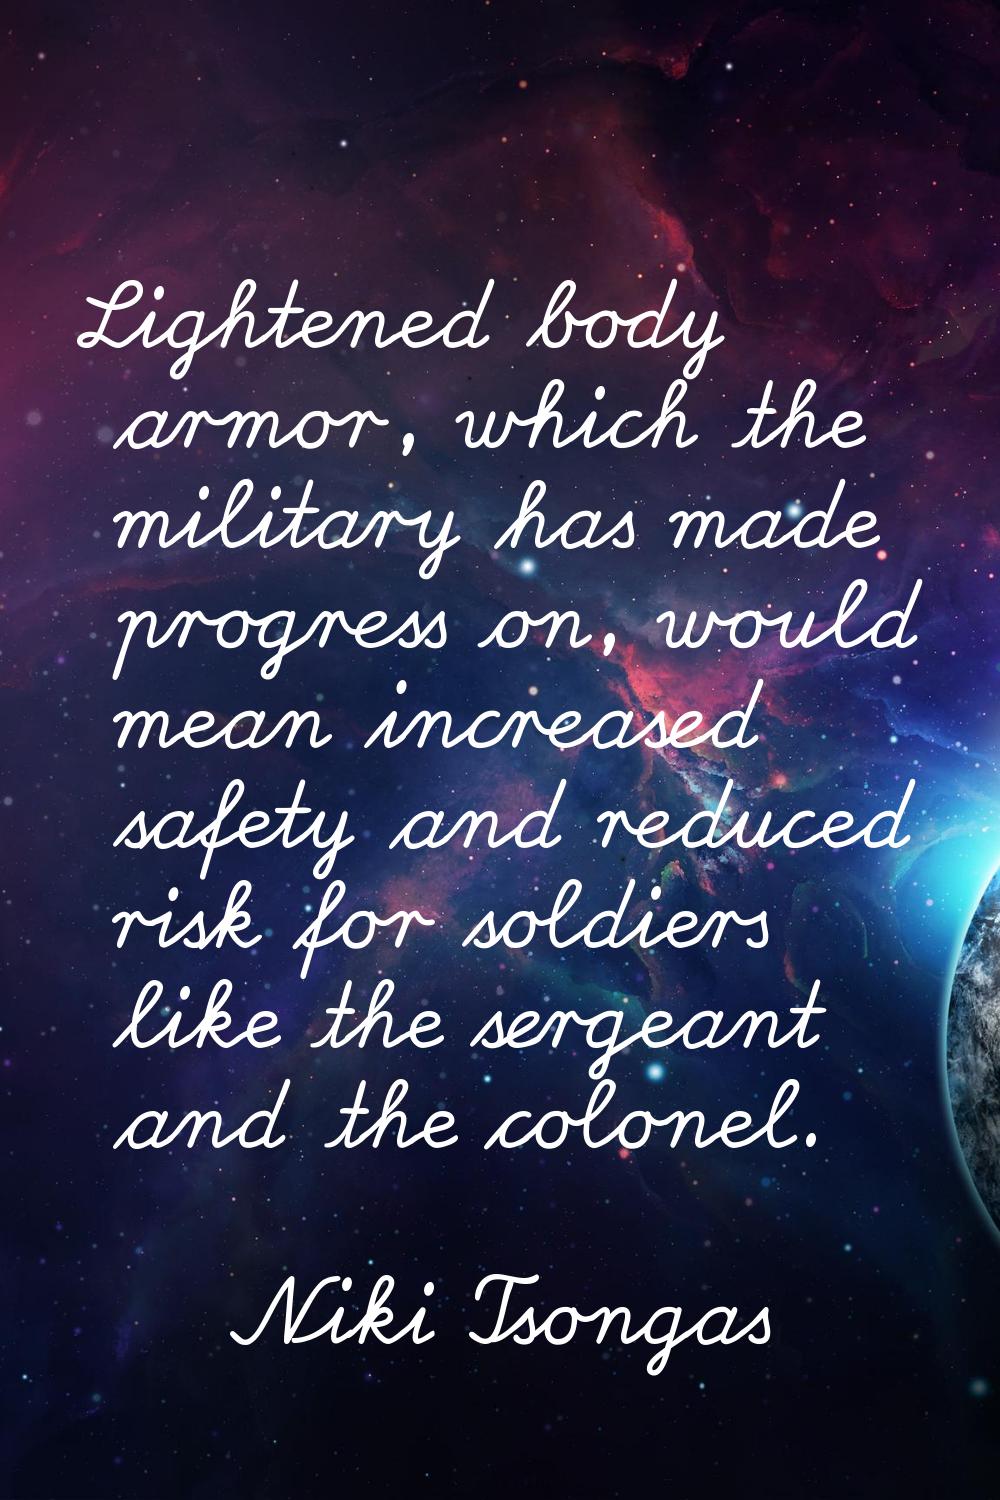 Lightened body armor, which the military has made progress on, would mean increased safety and redu